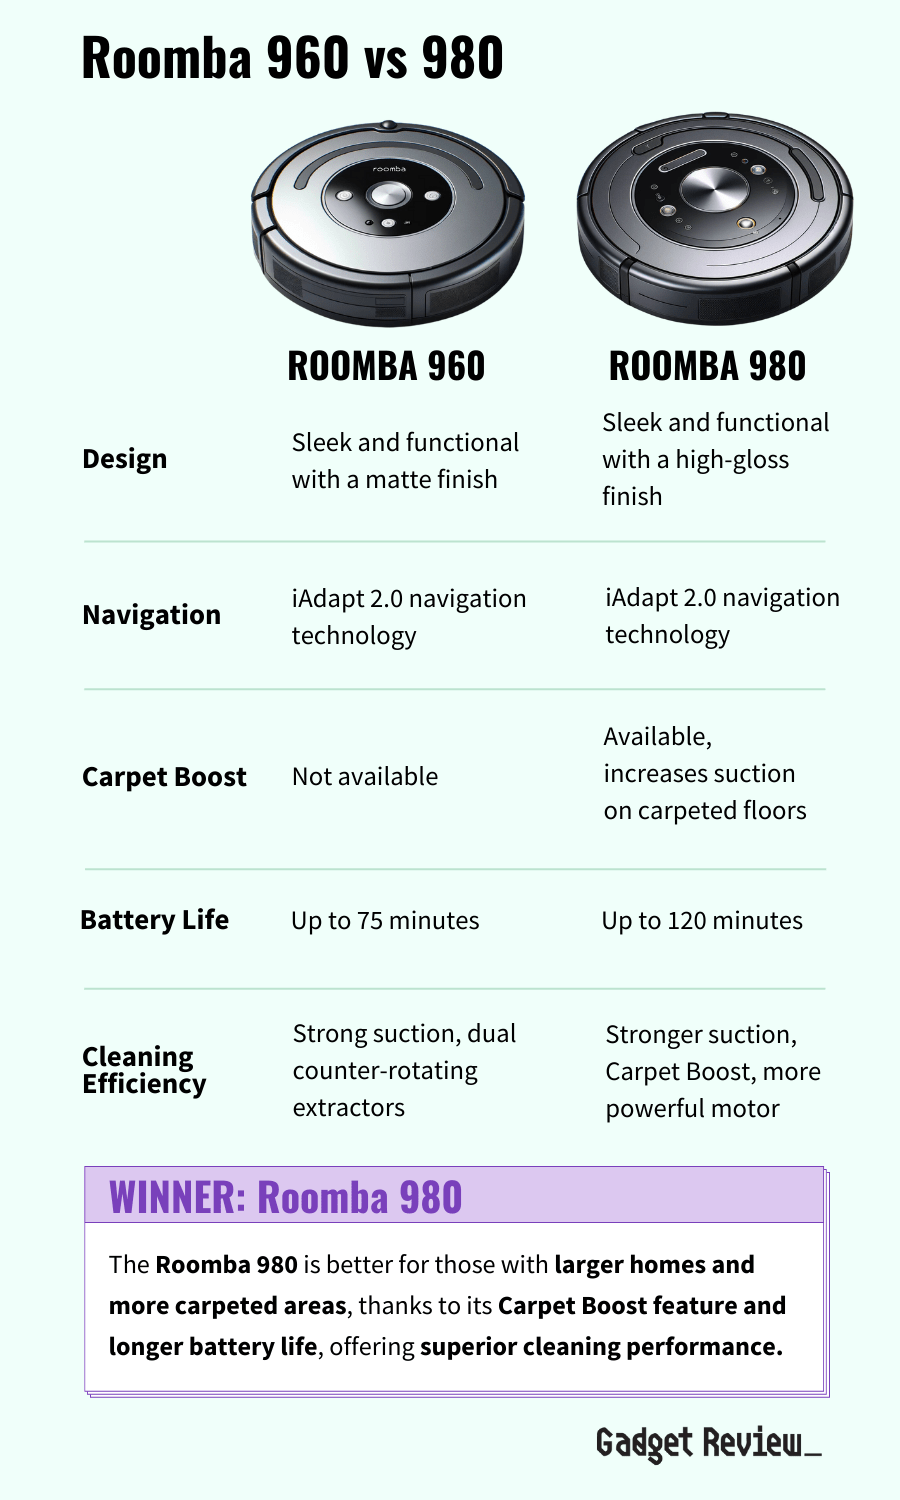 A table comparing the differences between the Roomba 960 and Roomba 980 models.